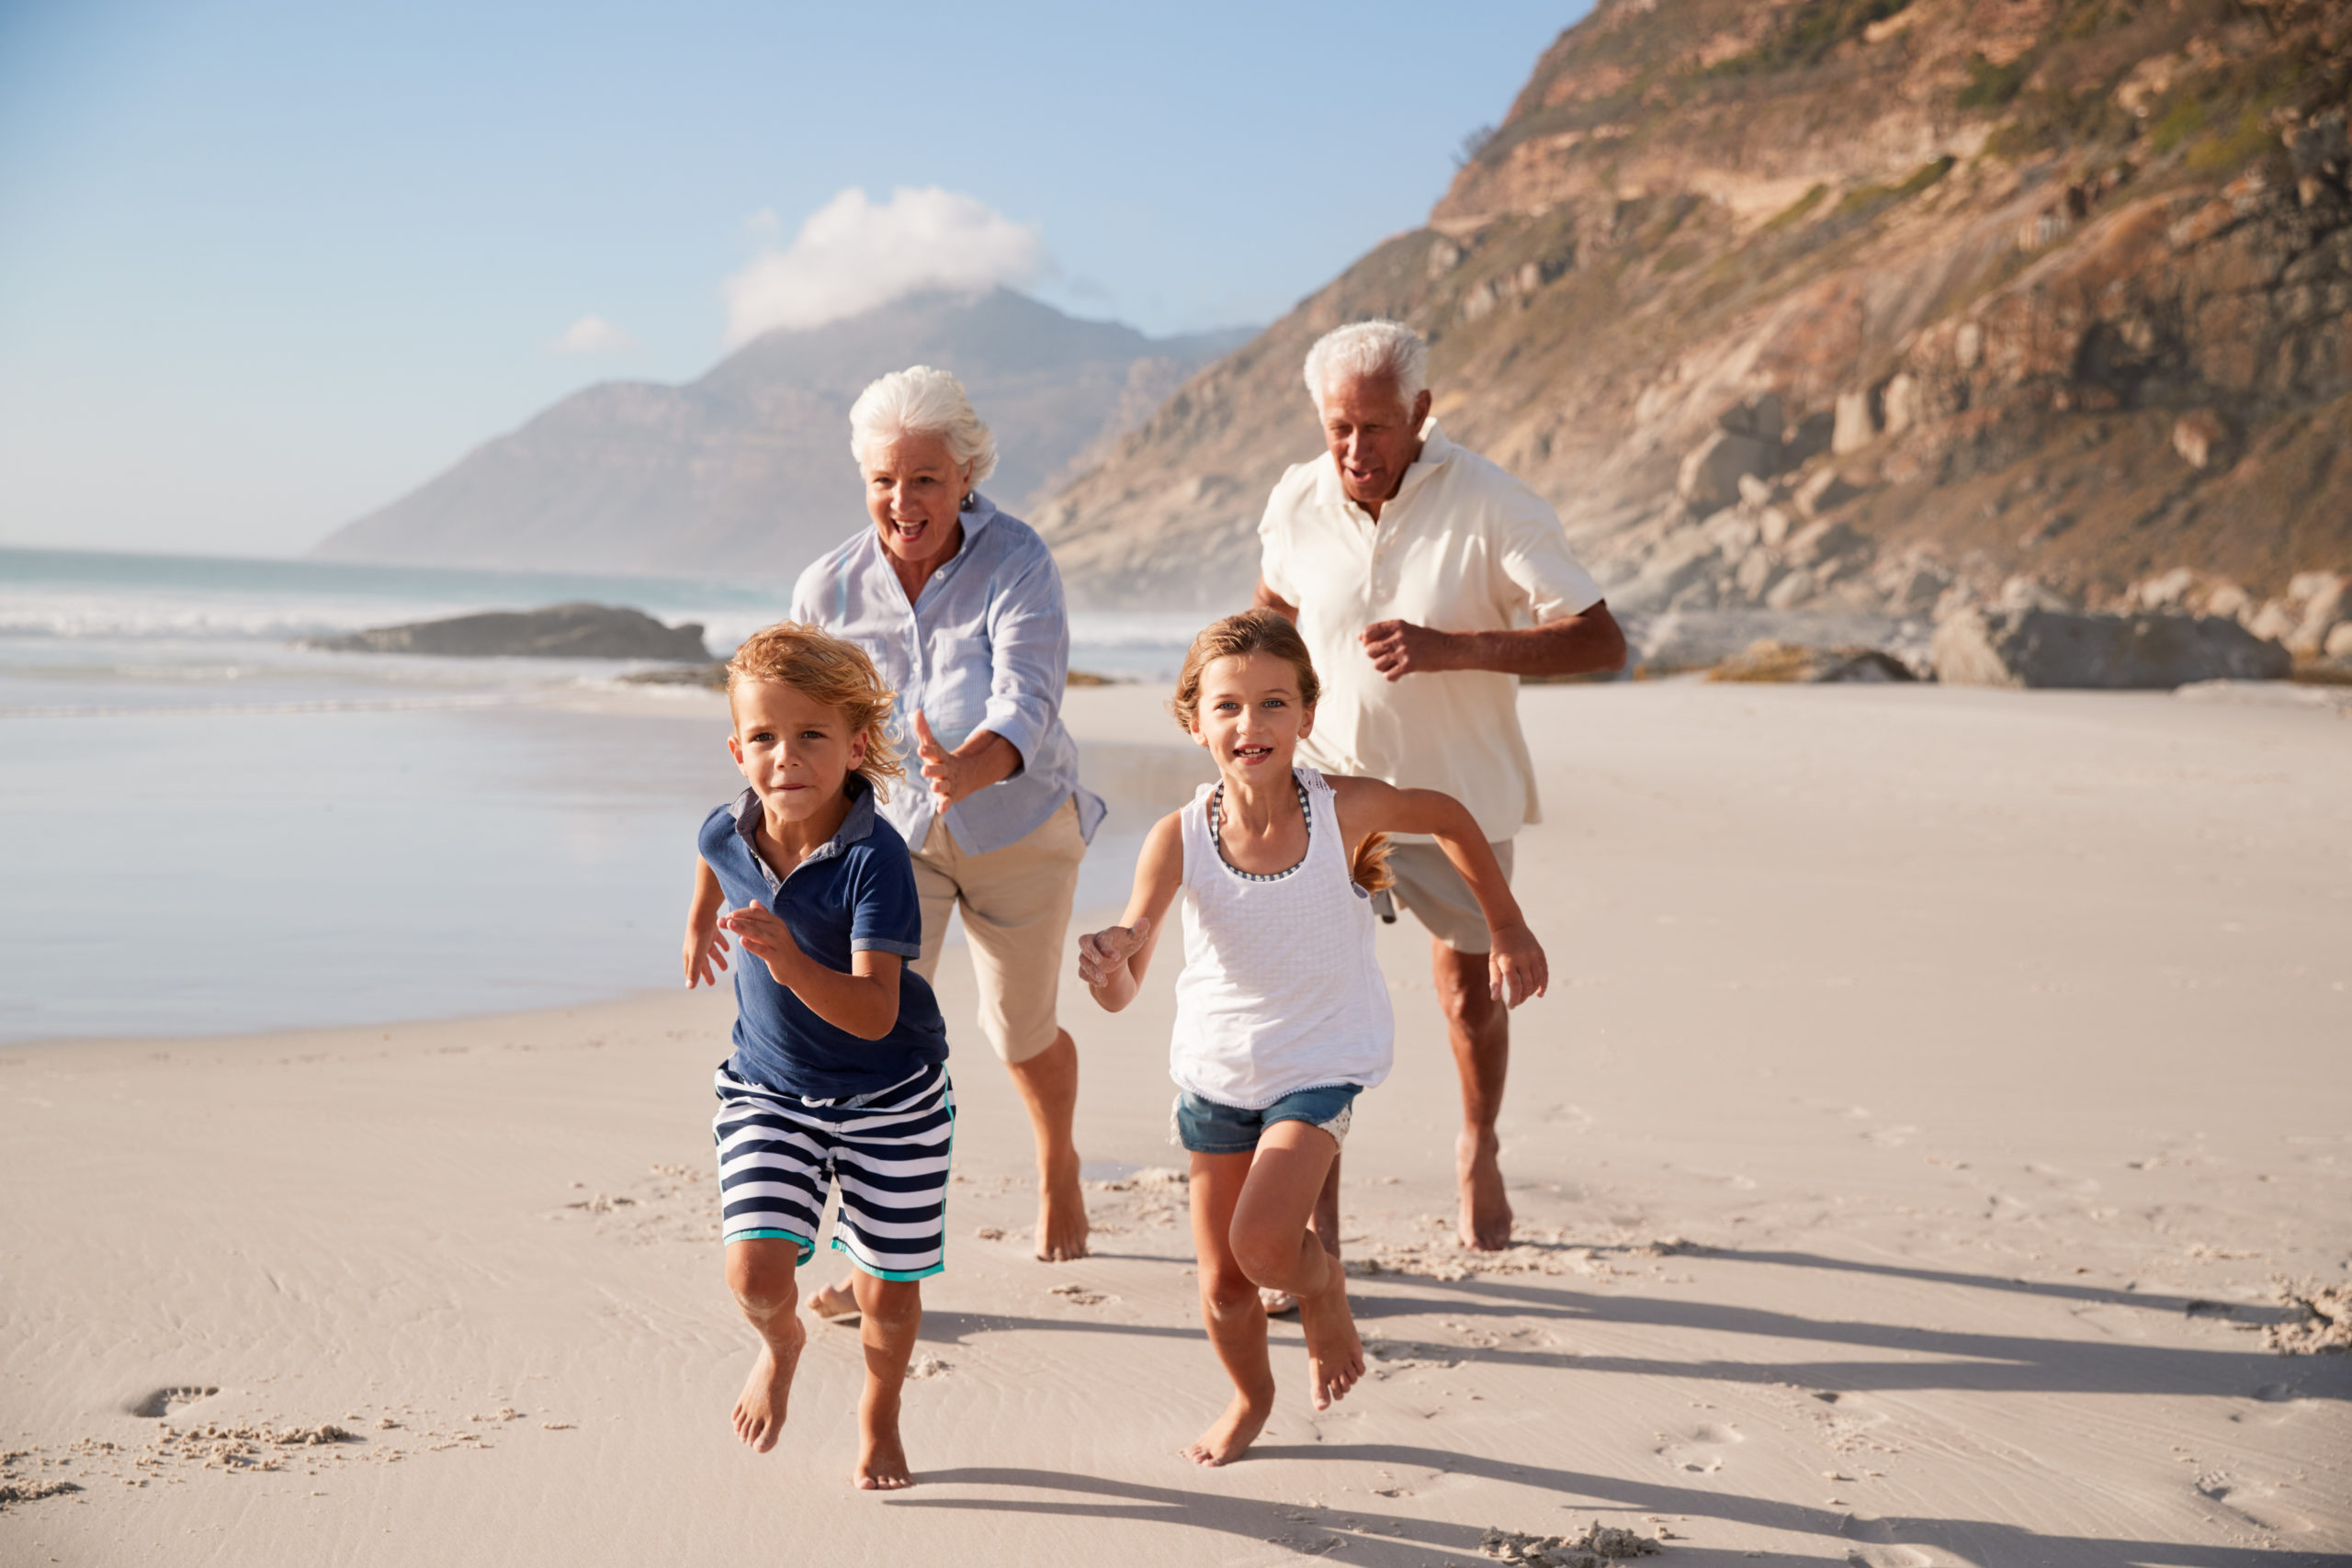 Can my children go on holiday with their grandparents if my ex does not consent?